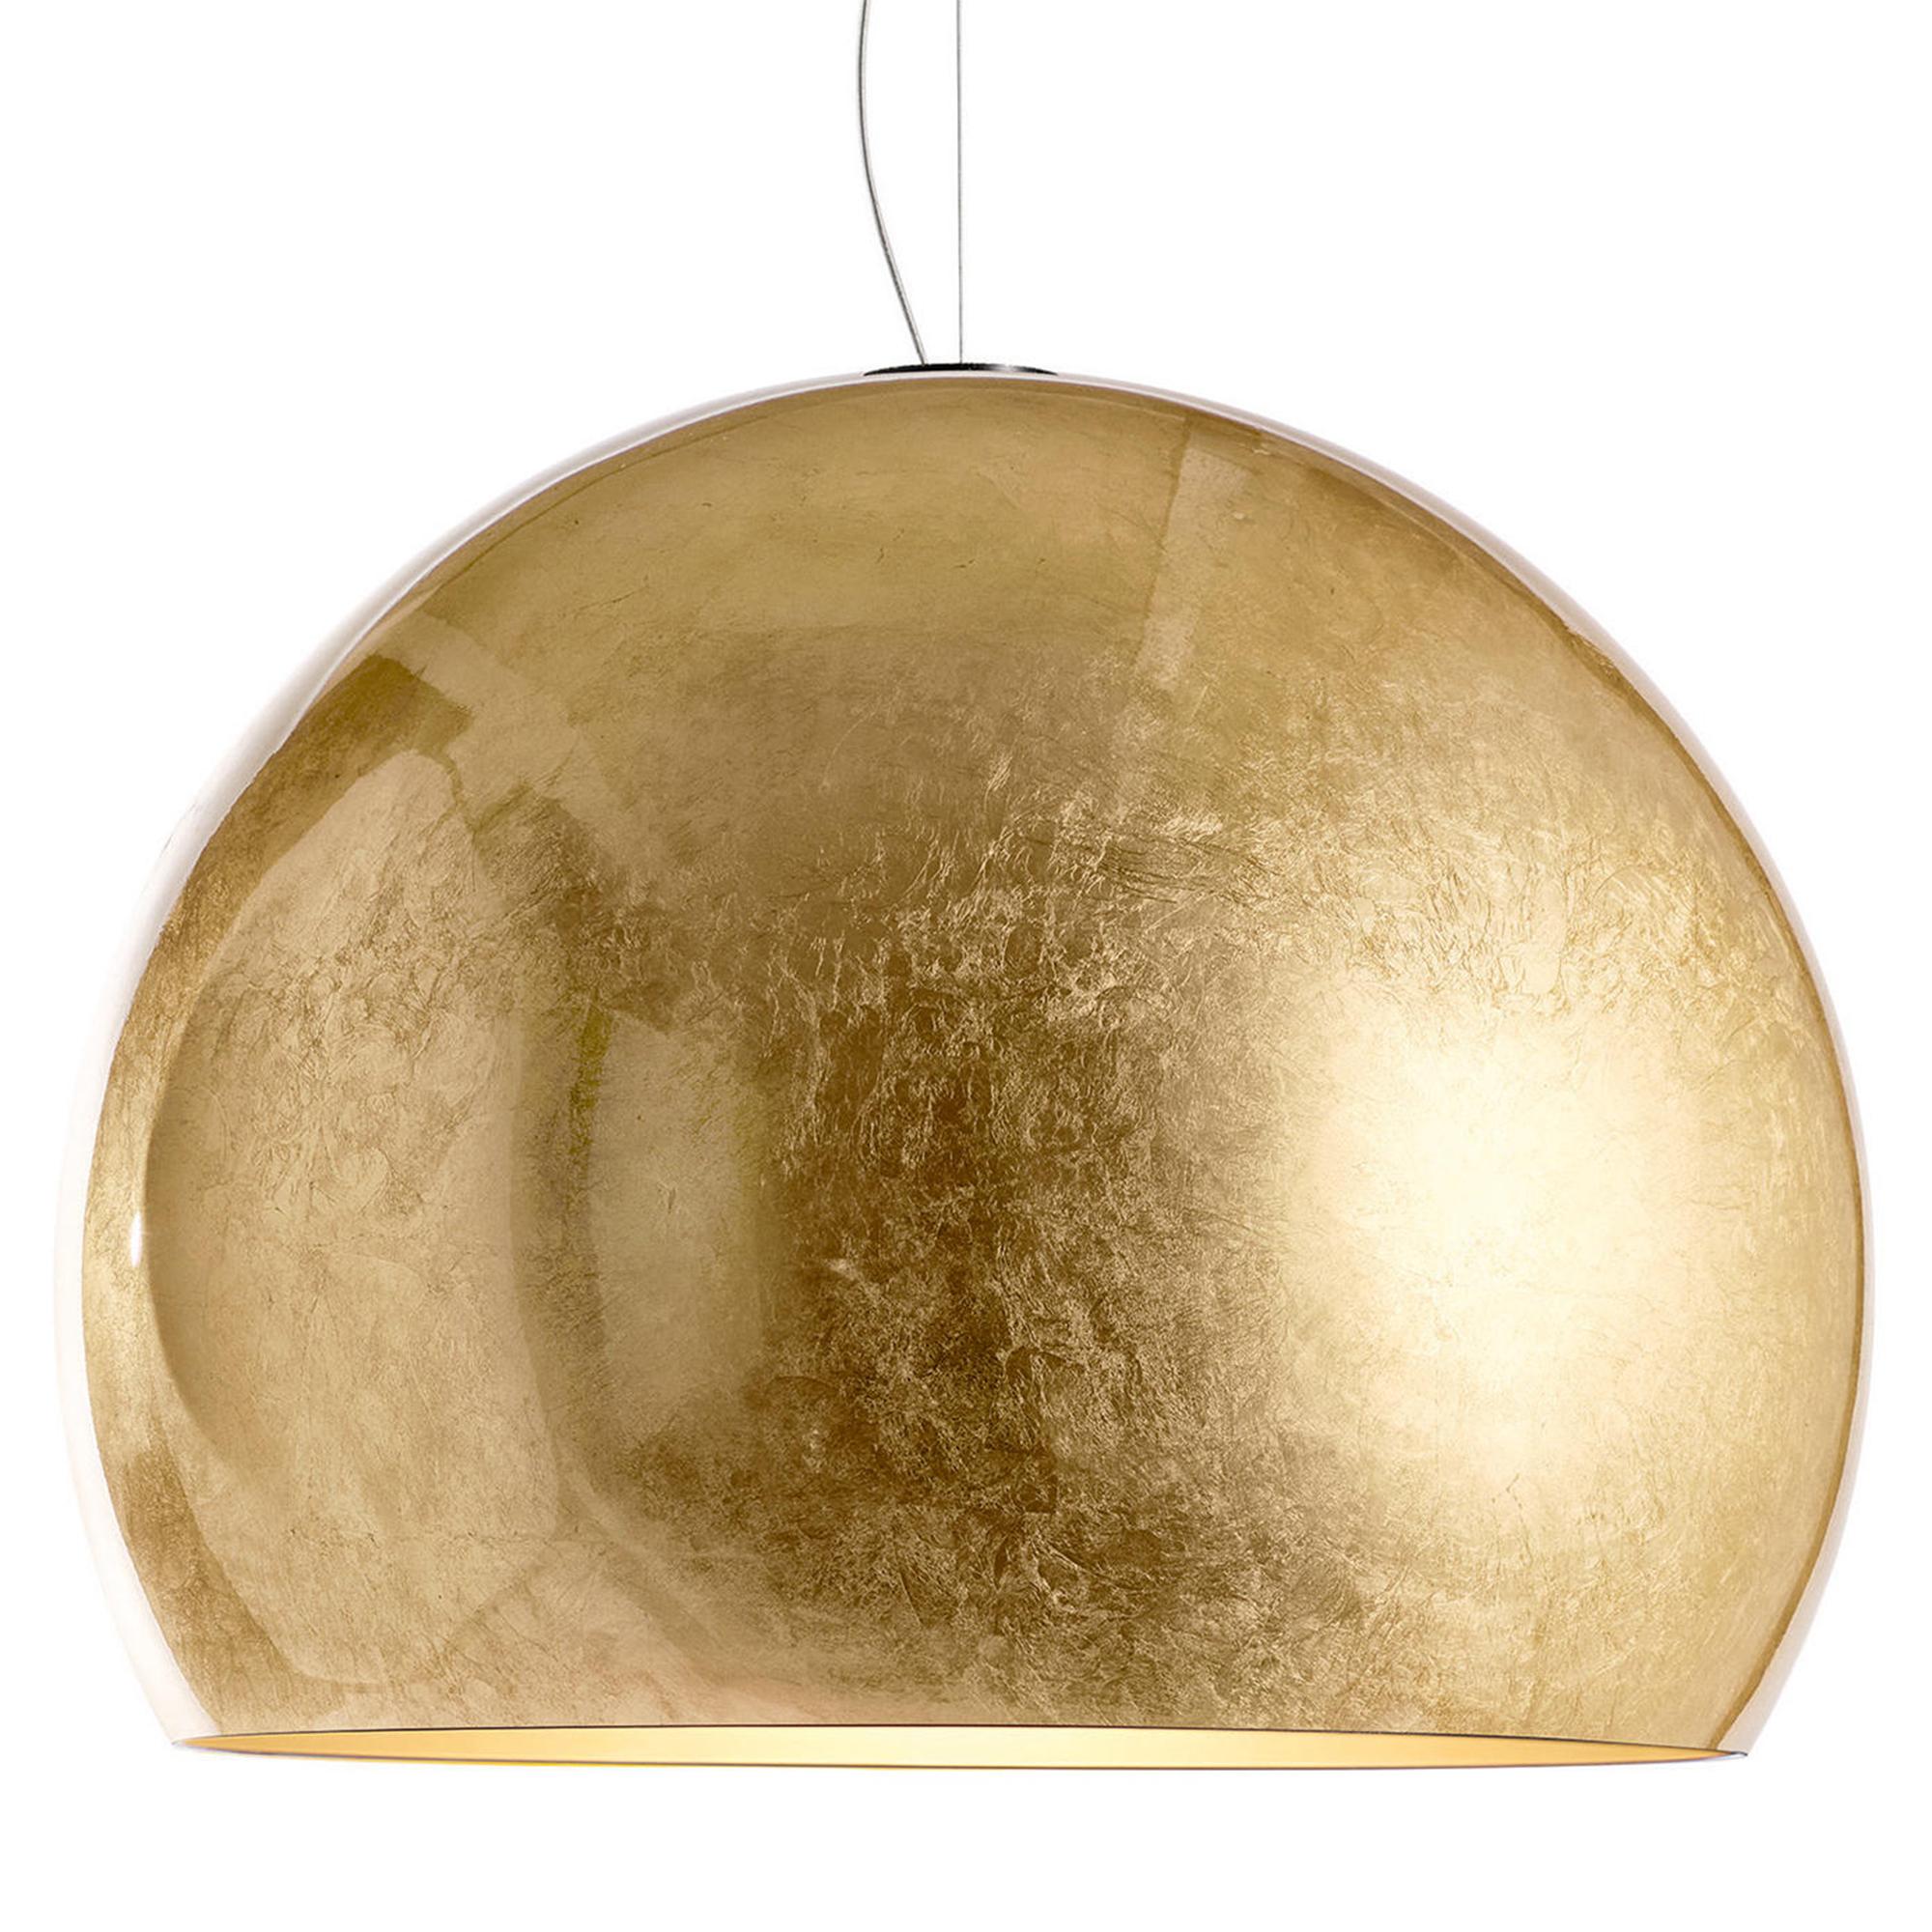 Suspension dome gold leaf with aluminium shade all
covered with gold leaf and in gold varnished inside shade.
With stainless steel cable in 250 cm and with 250cm transparent
electric cord. With 1 bulb, lamp holder type E27, max 70 watt.
Bulb not